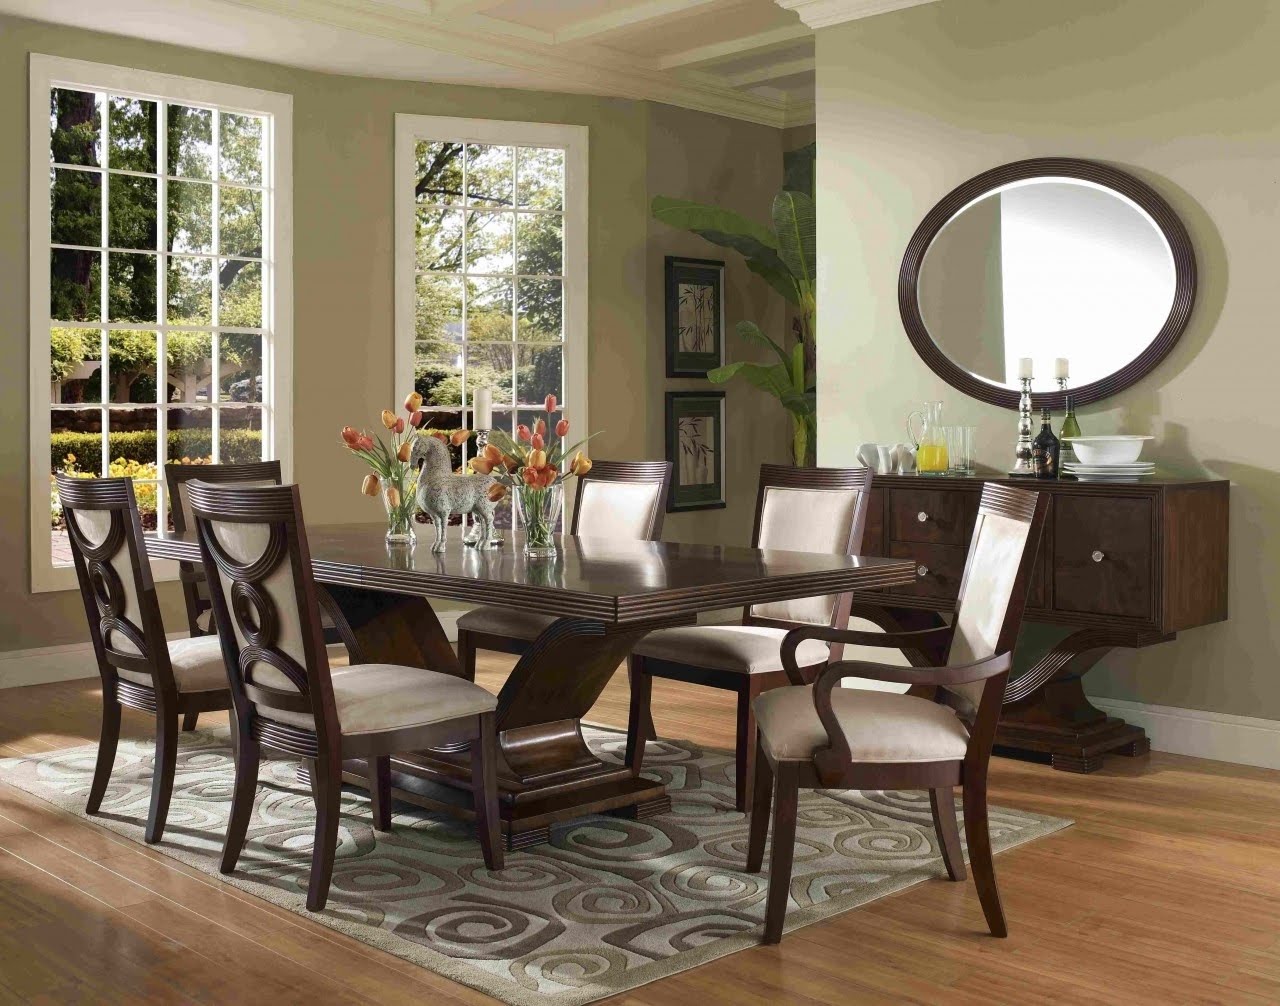 Formal Dining Room Sets Visualhunt, Rooms To Go Formal Dining Room Set